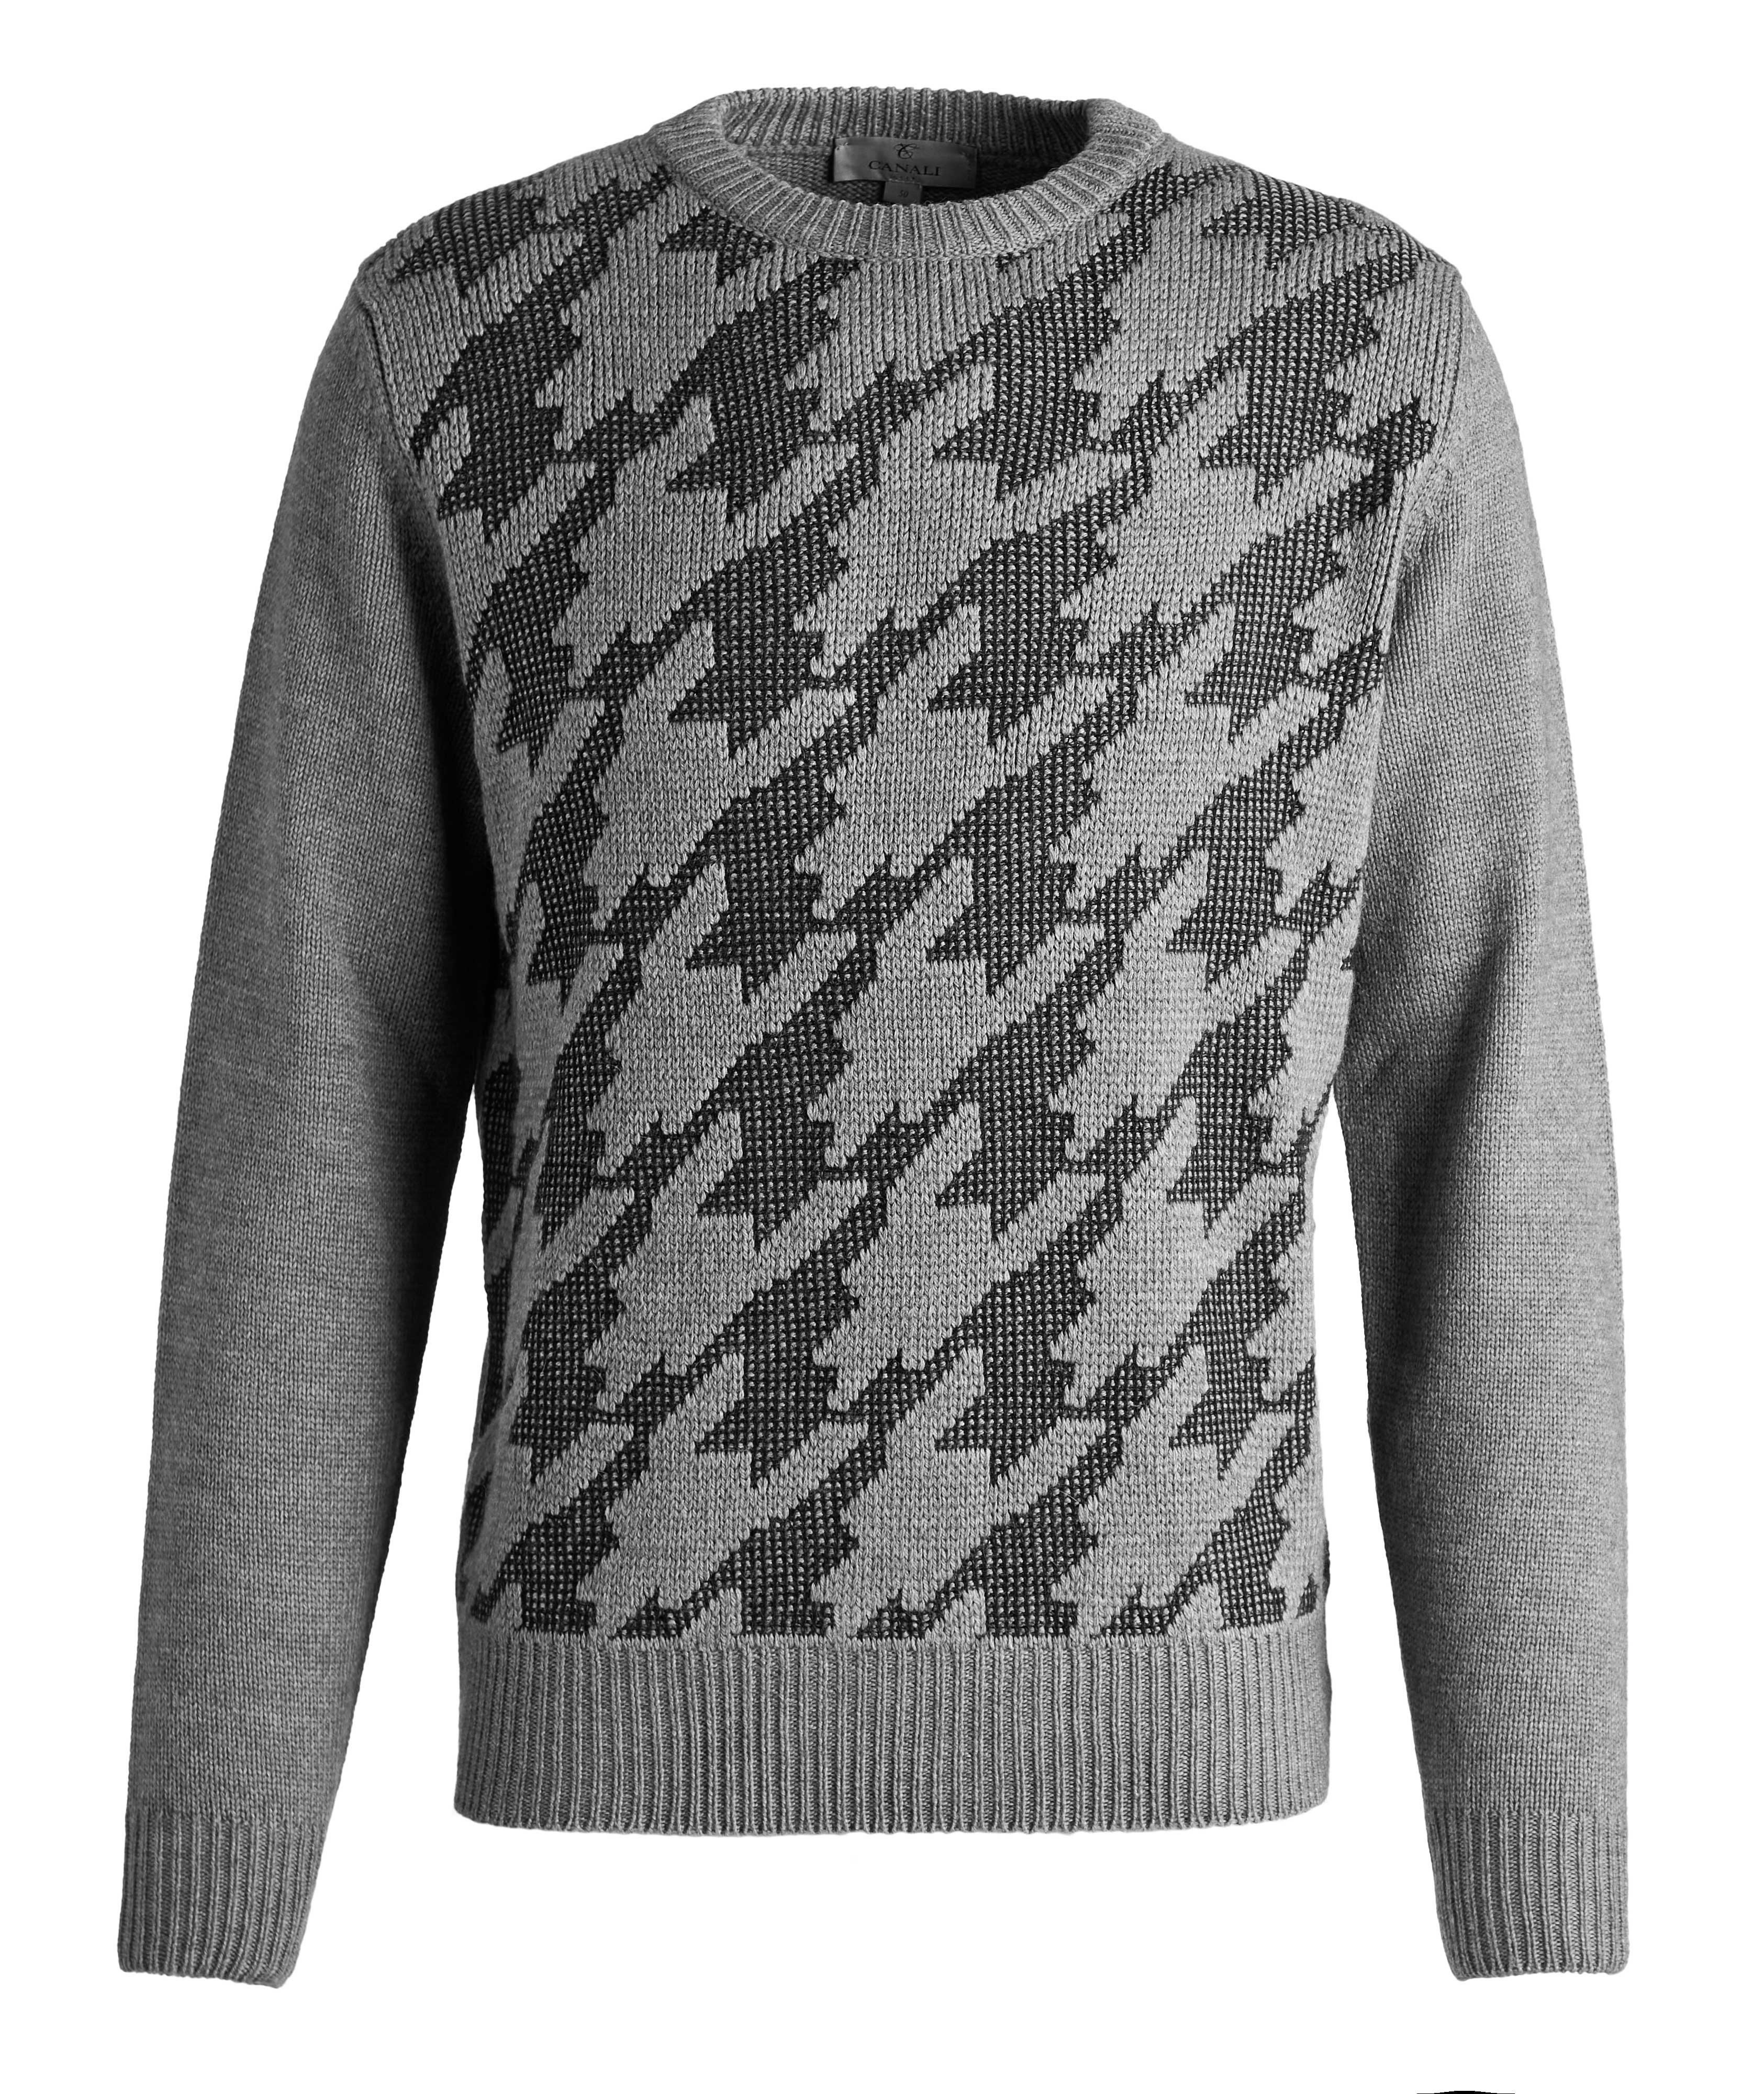 Houndstooth Wool-Cotton Blend Sweater image 0